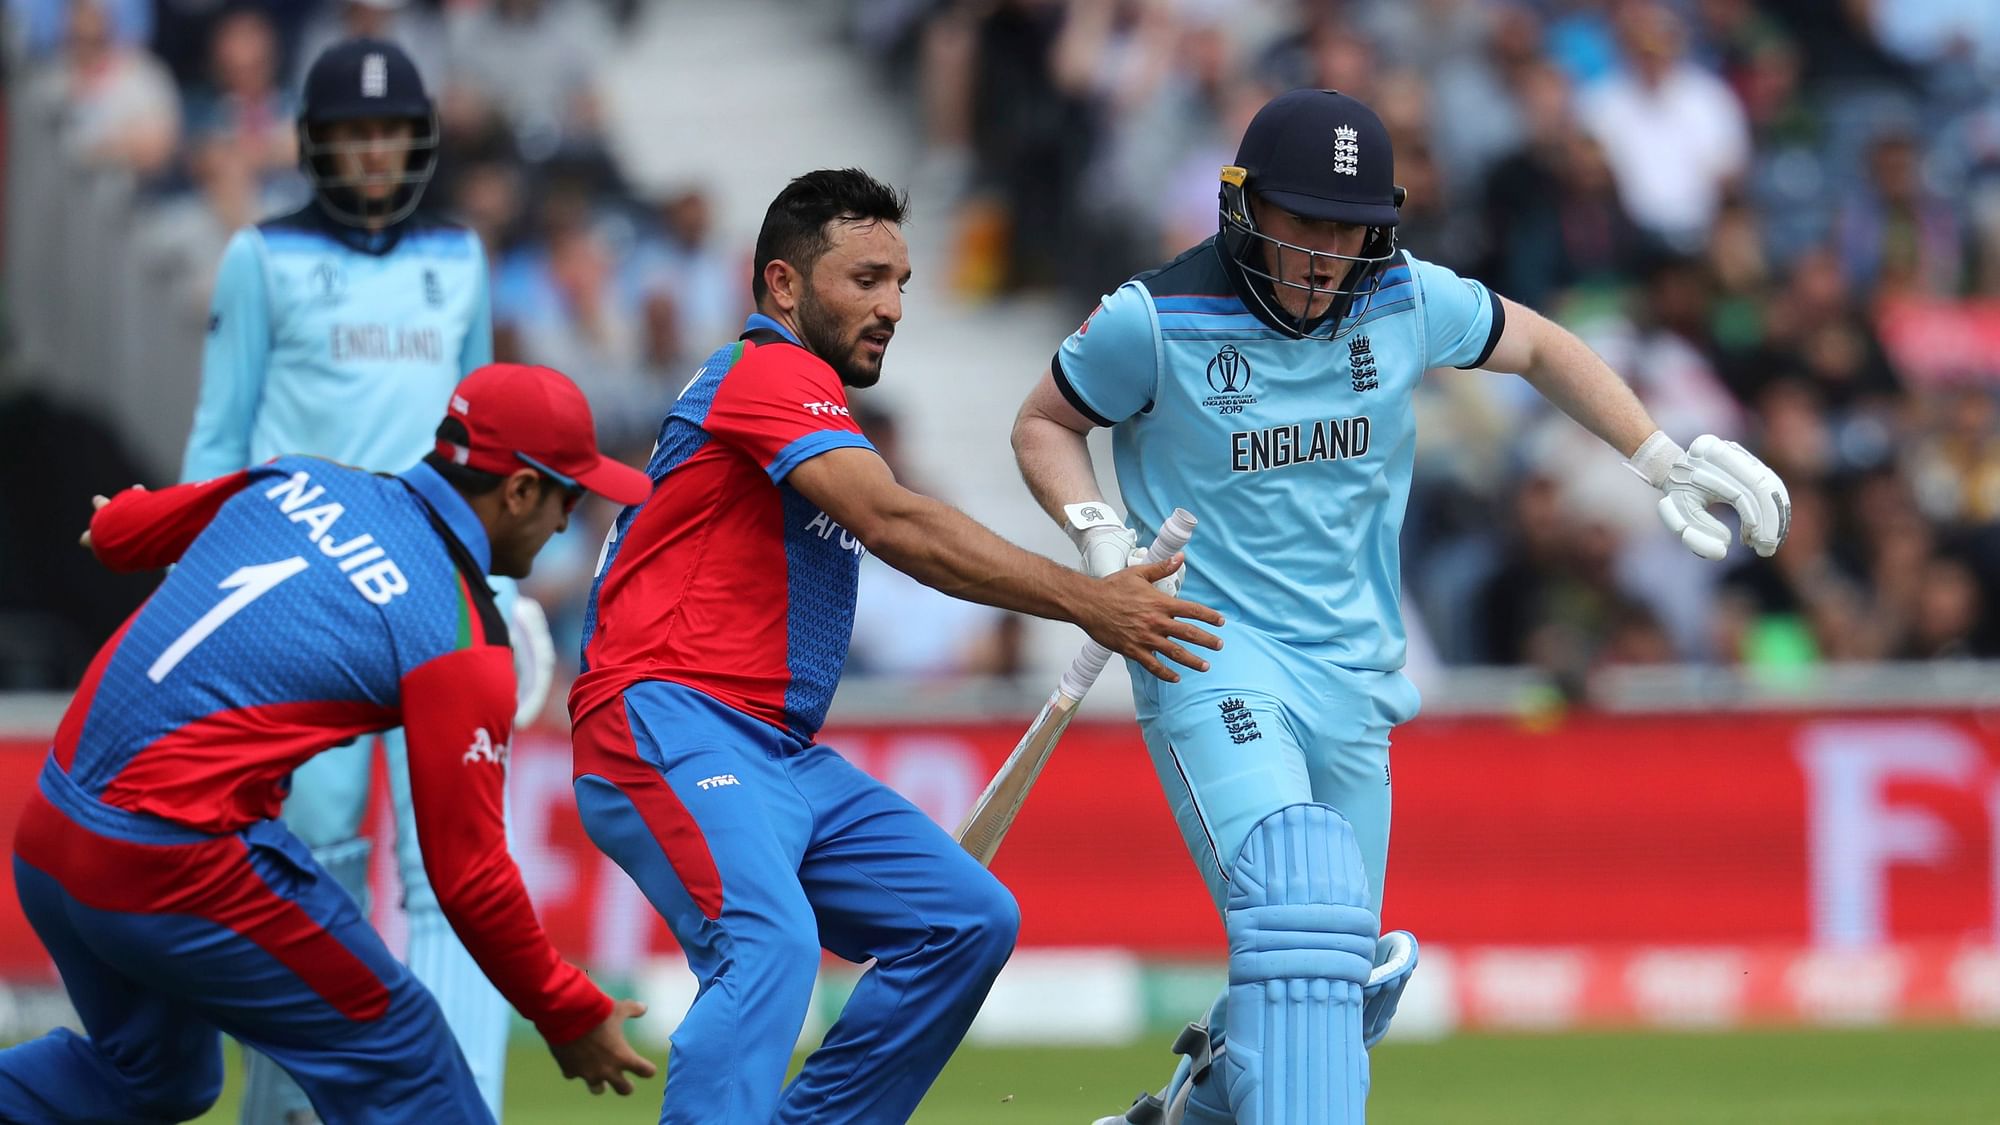 Watch Highlights: Eoin Morgan hit 17 sixes as England beat Afghanistan by 150 runs on Tuesday in Manchester.